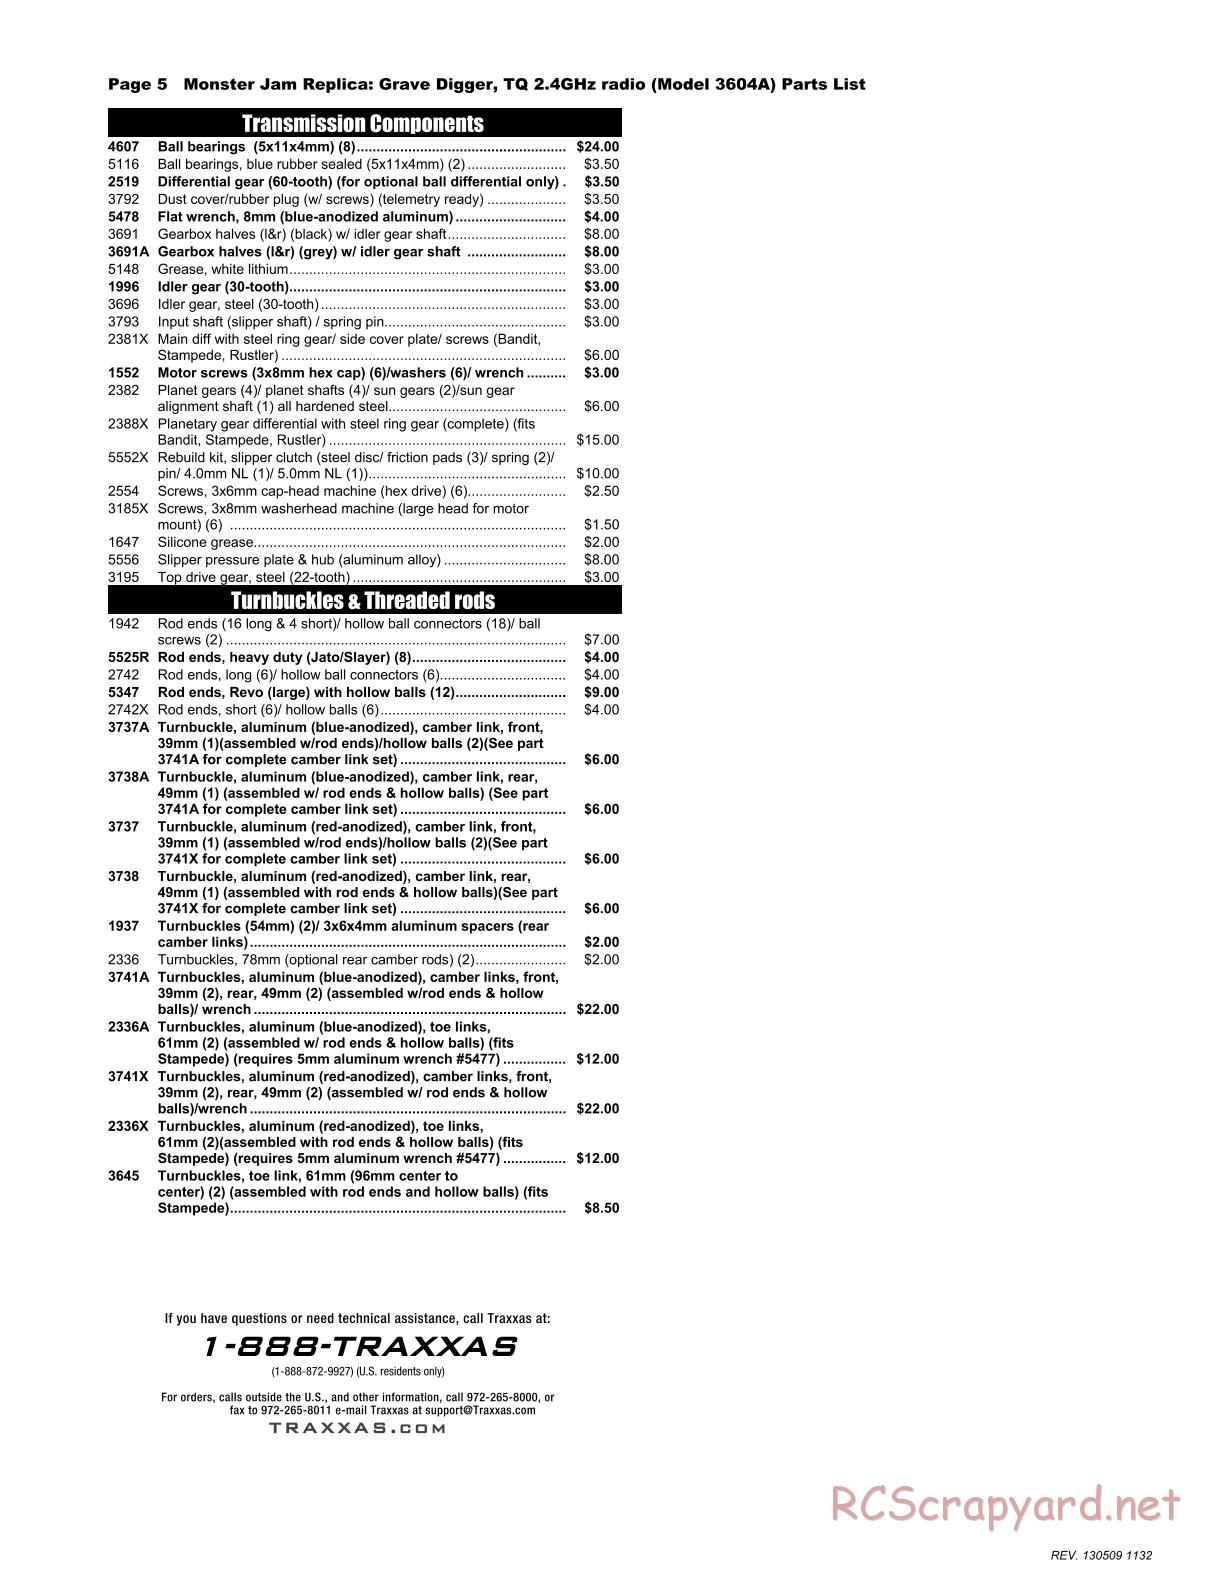 Traxxas - Monster Jam - Grave Digger - Parts List - Page 5